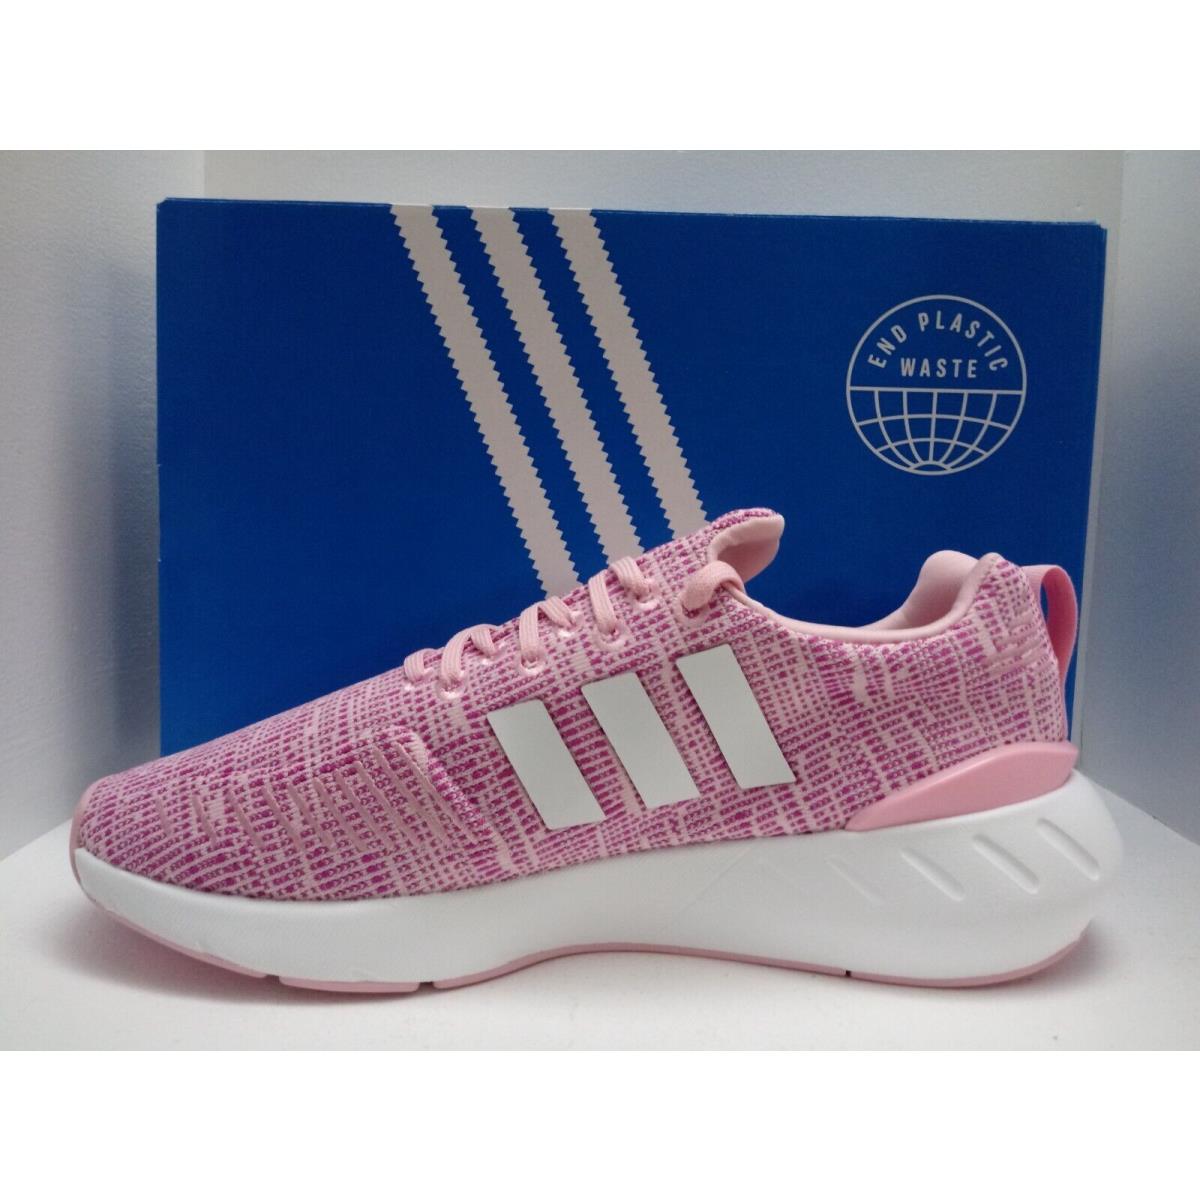 Adidas shoes  - PINK/WHITE 0